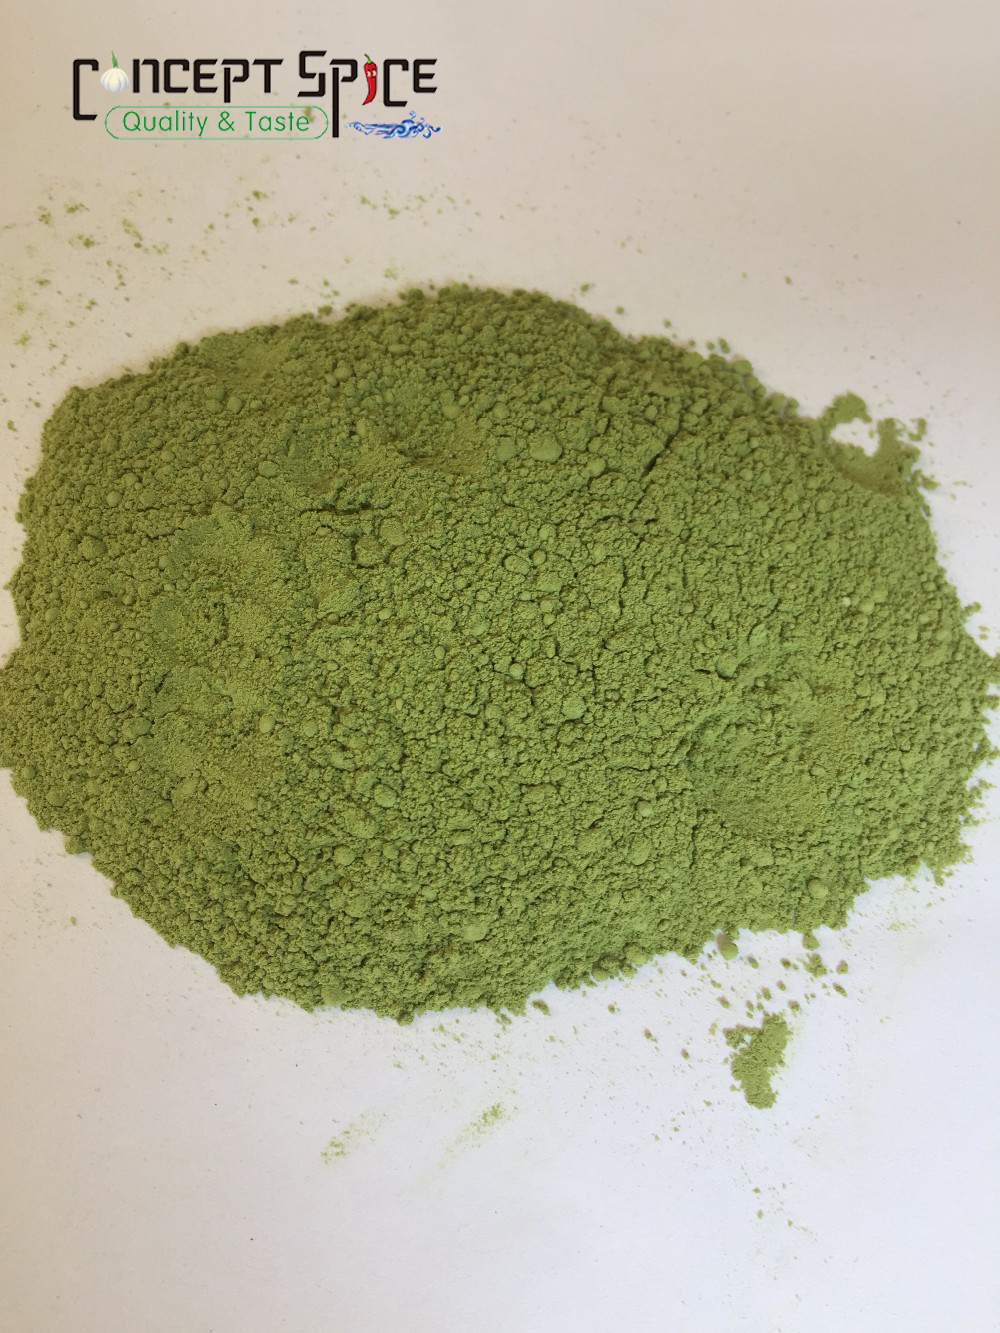 Dehydrated chive powder 